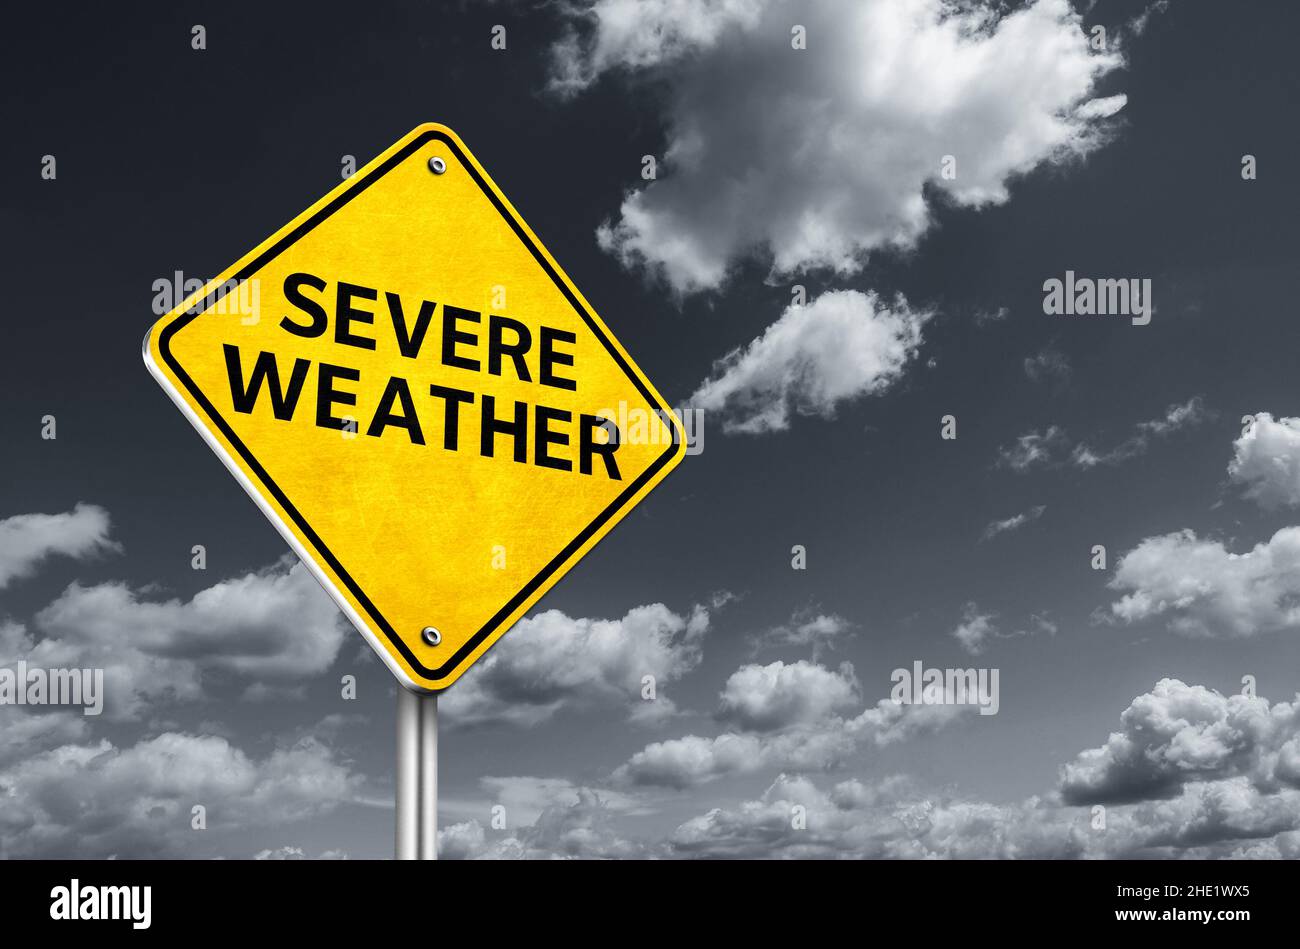 Severe Weather information road sign Stock Photo